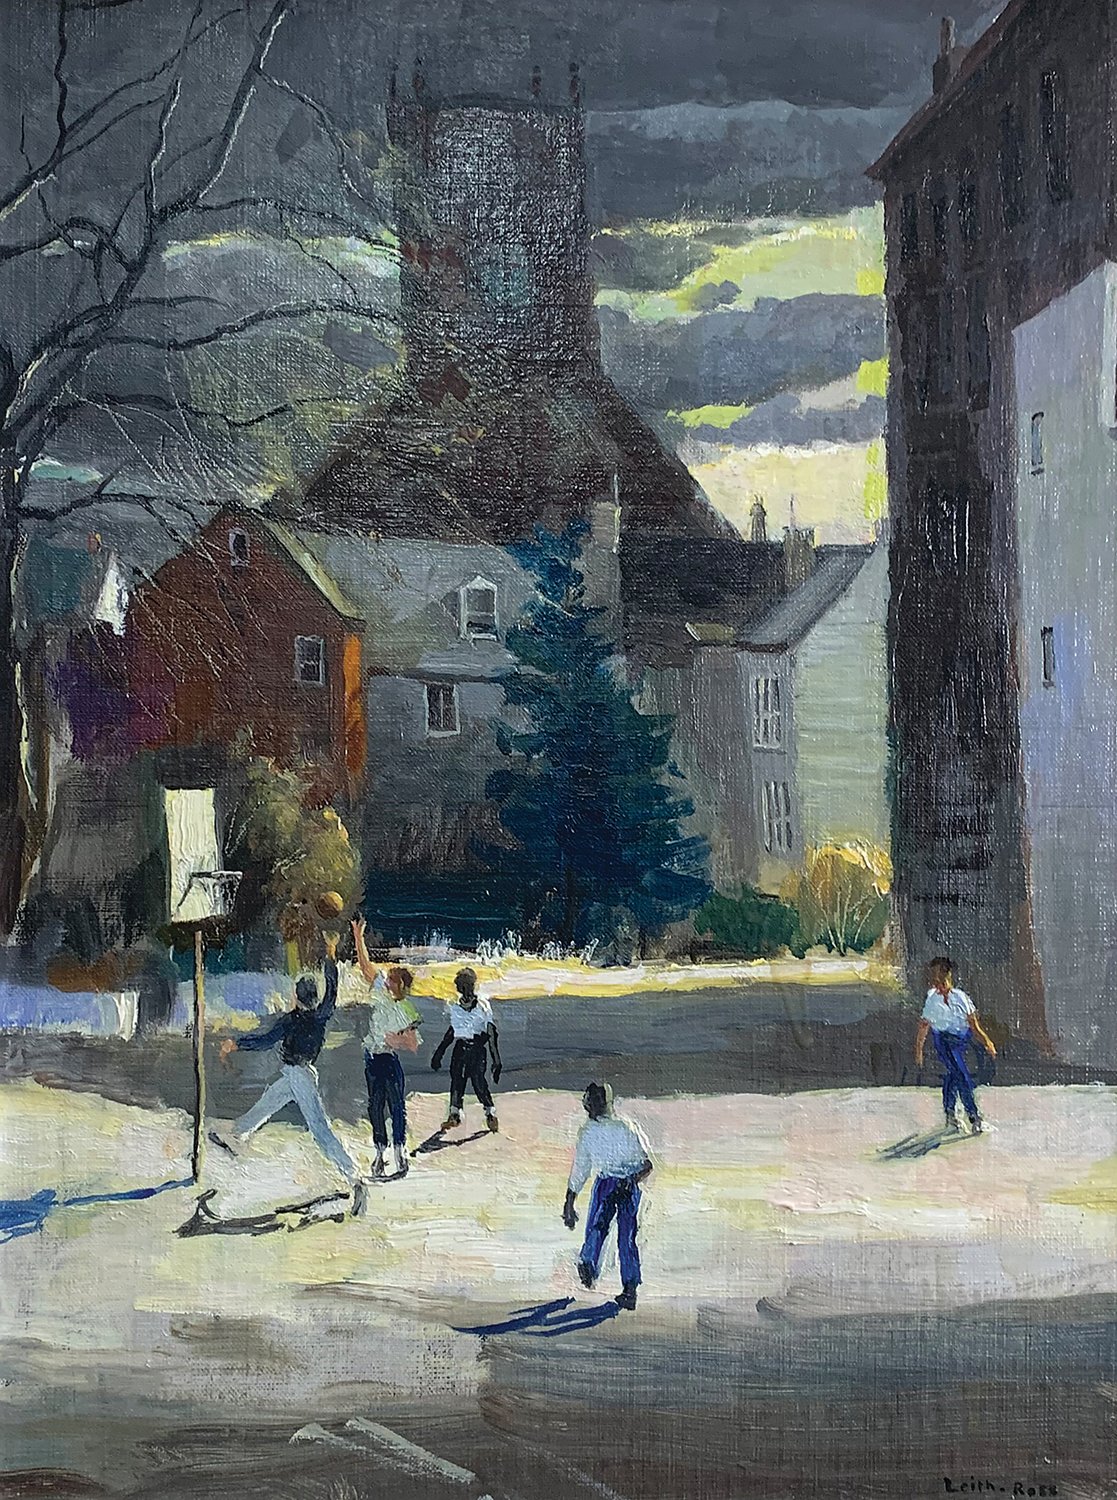 Harry Leith-Ross painted this scene in the era of the Pennsylvania Impressionists.